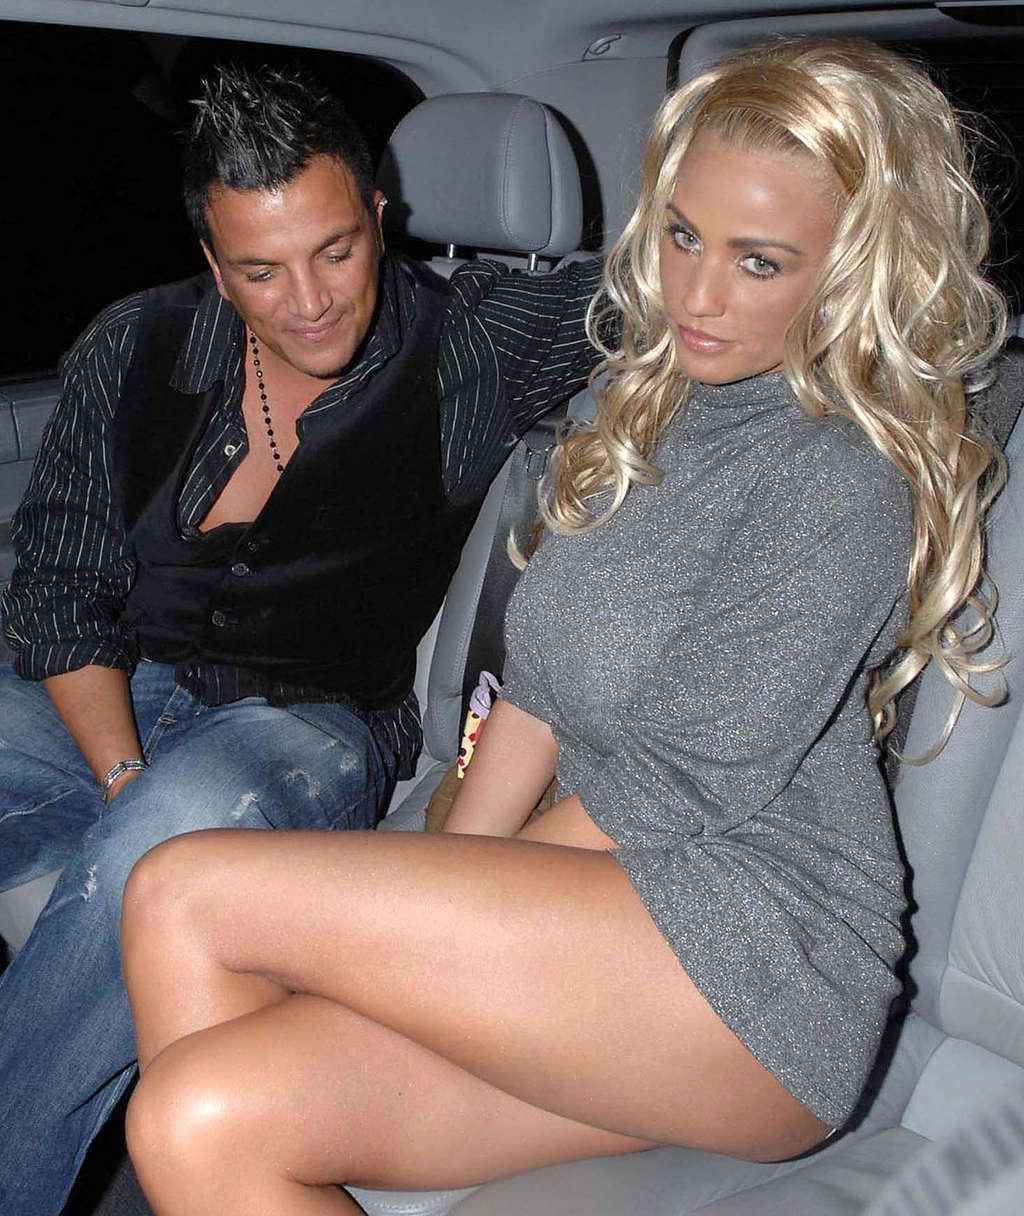 Katie Price spread her legs and showing sexy underwear while she is drunk #75362961